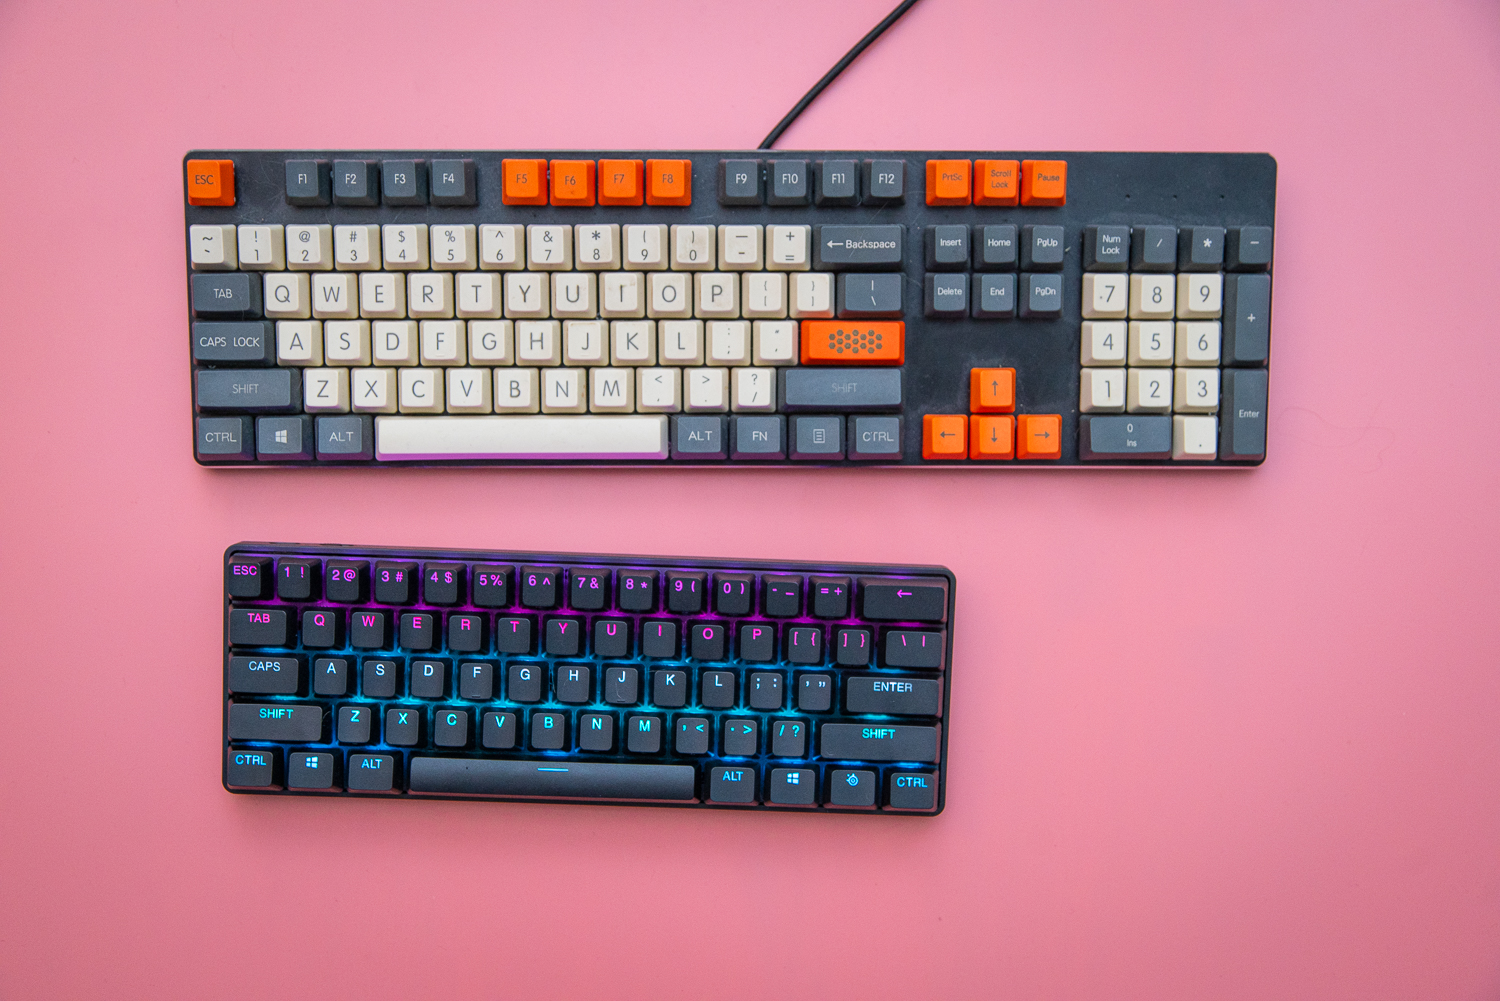 SteelSeries Apex Pro Mini compared to a full-sized keyboard.